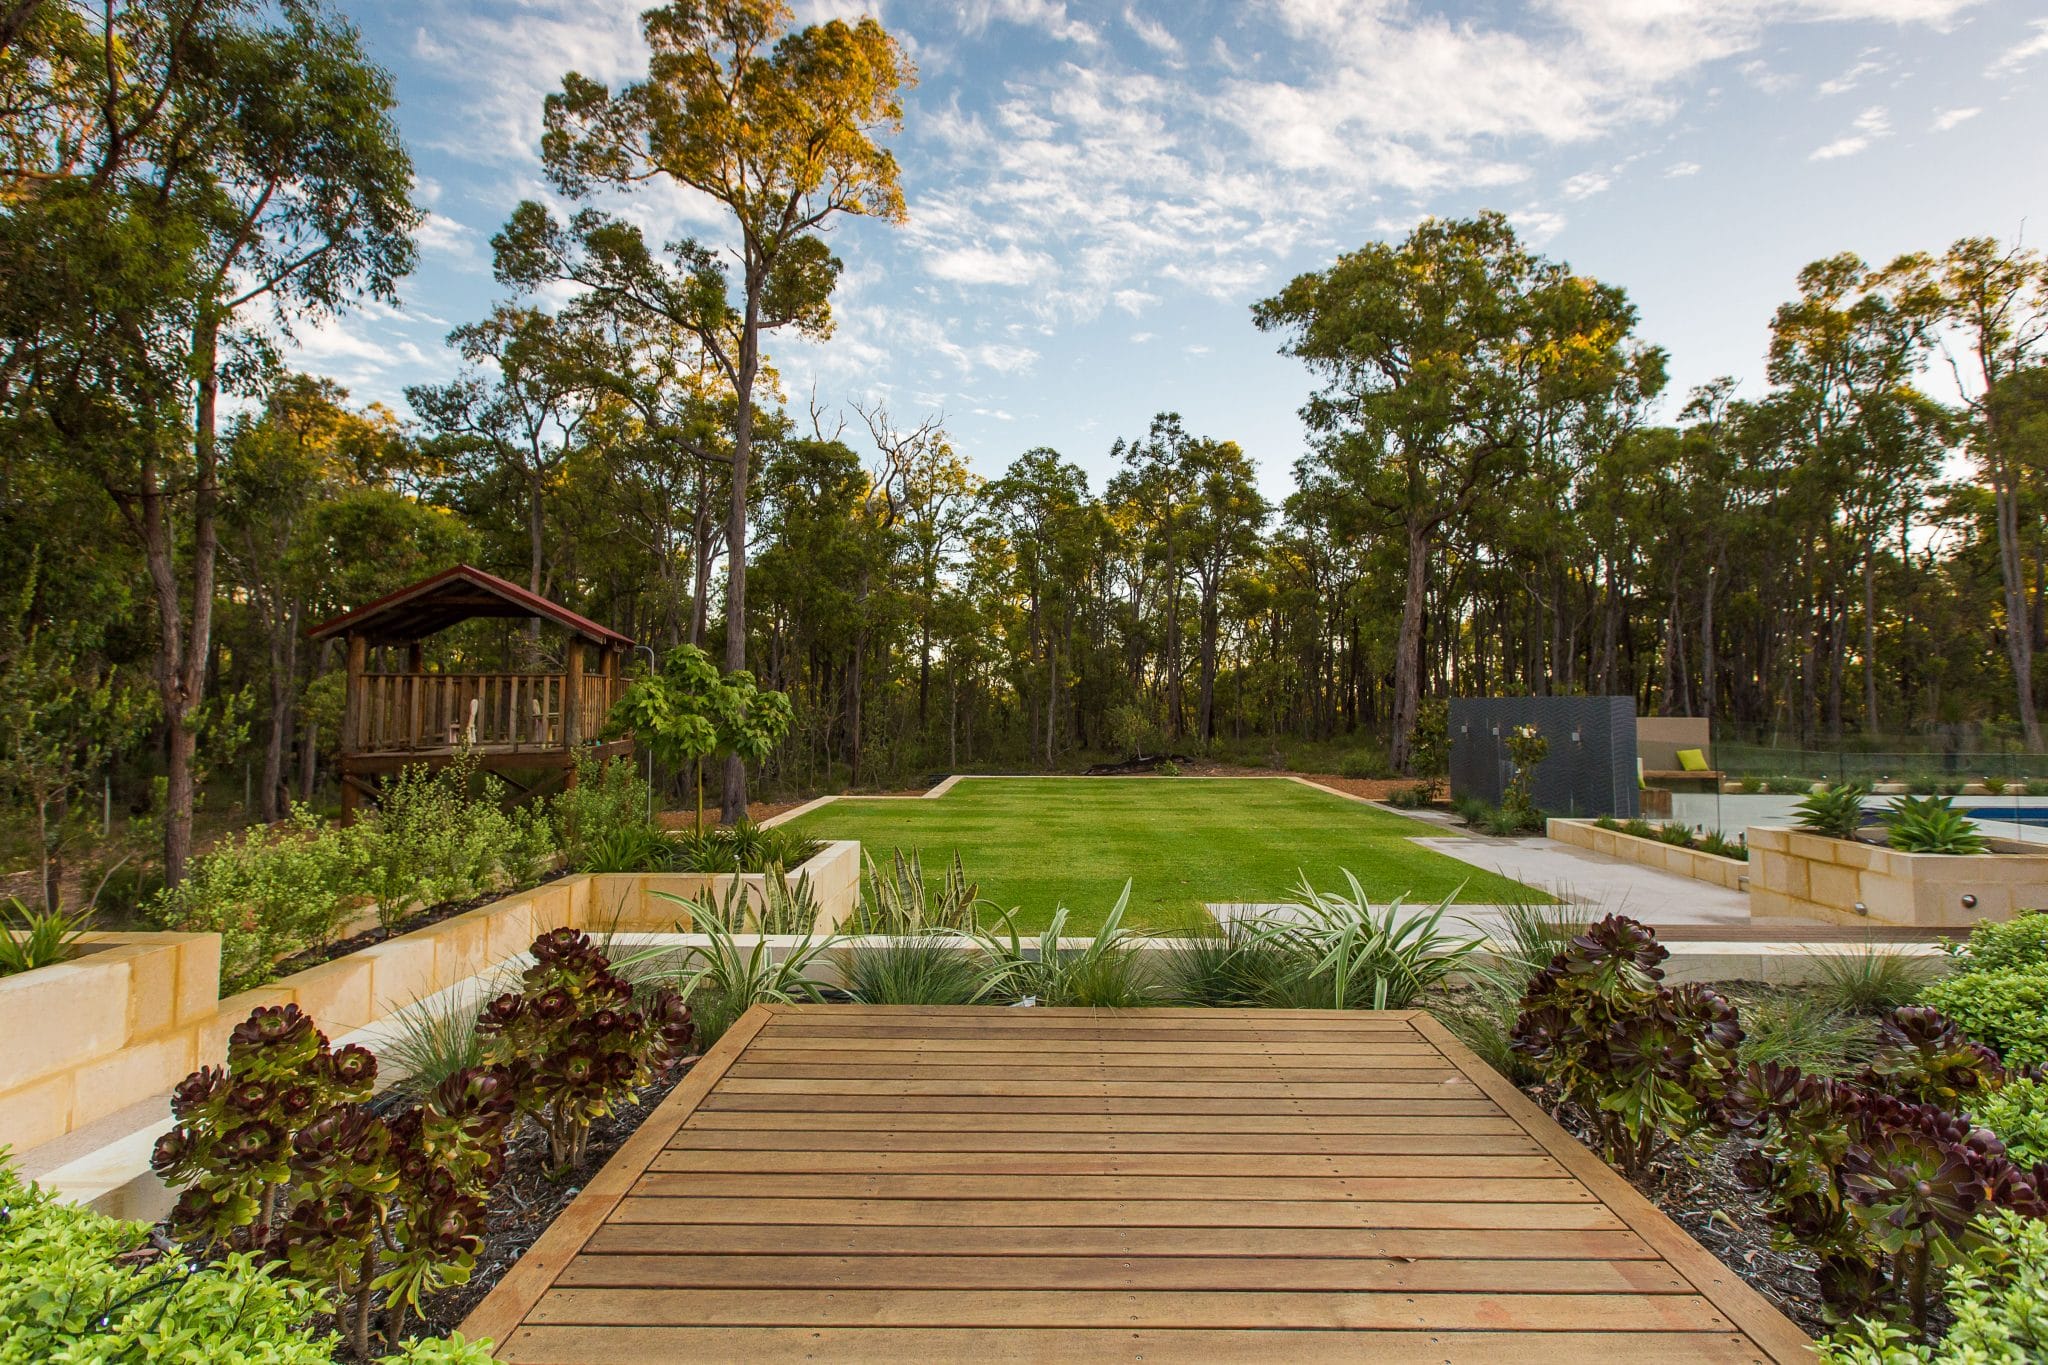 Eco-Geek Environment - 6 Sustainably Serene Ideas to Incorporate Into Your Landscaping Design